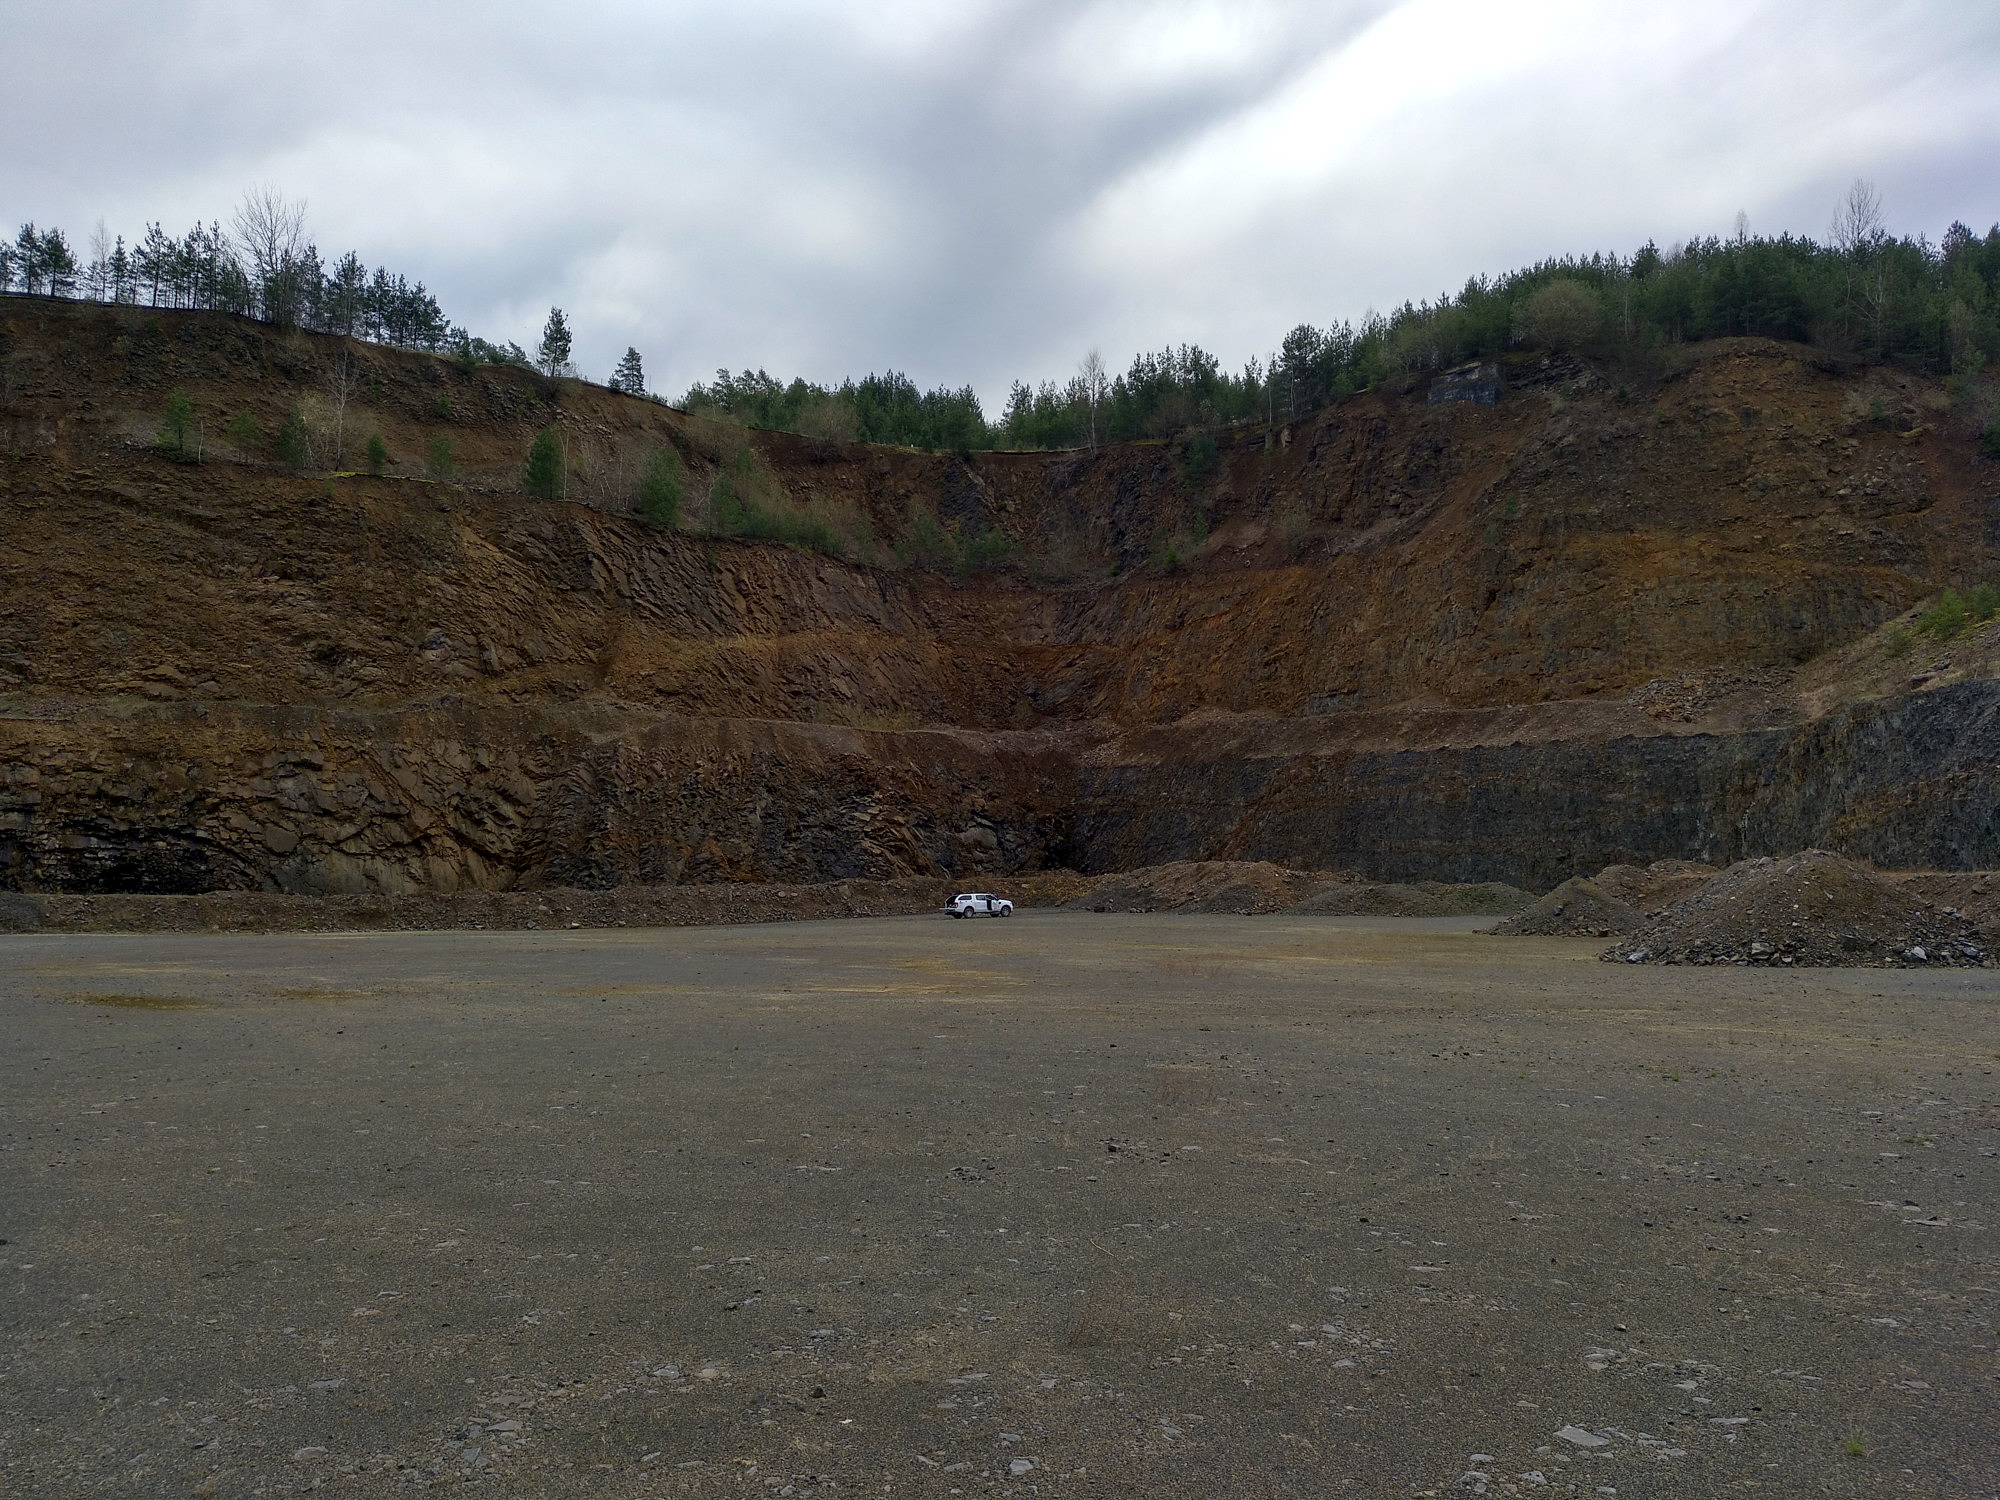 South-Eastern part of the Zeilberg quarry (image: Drews)